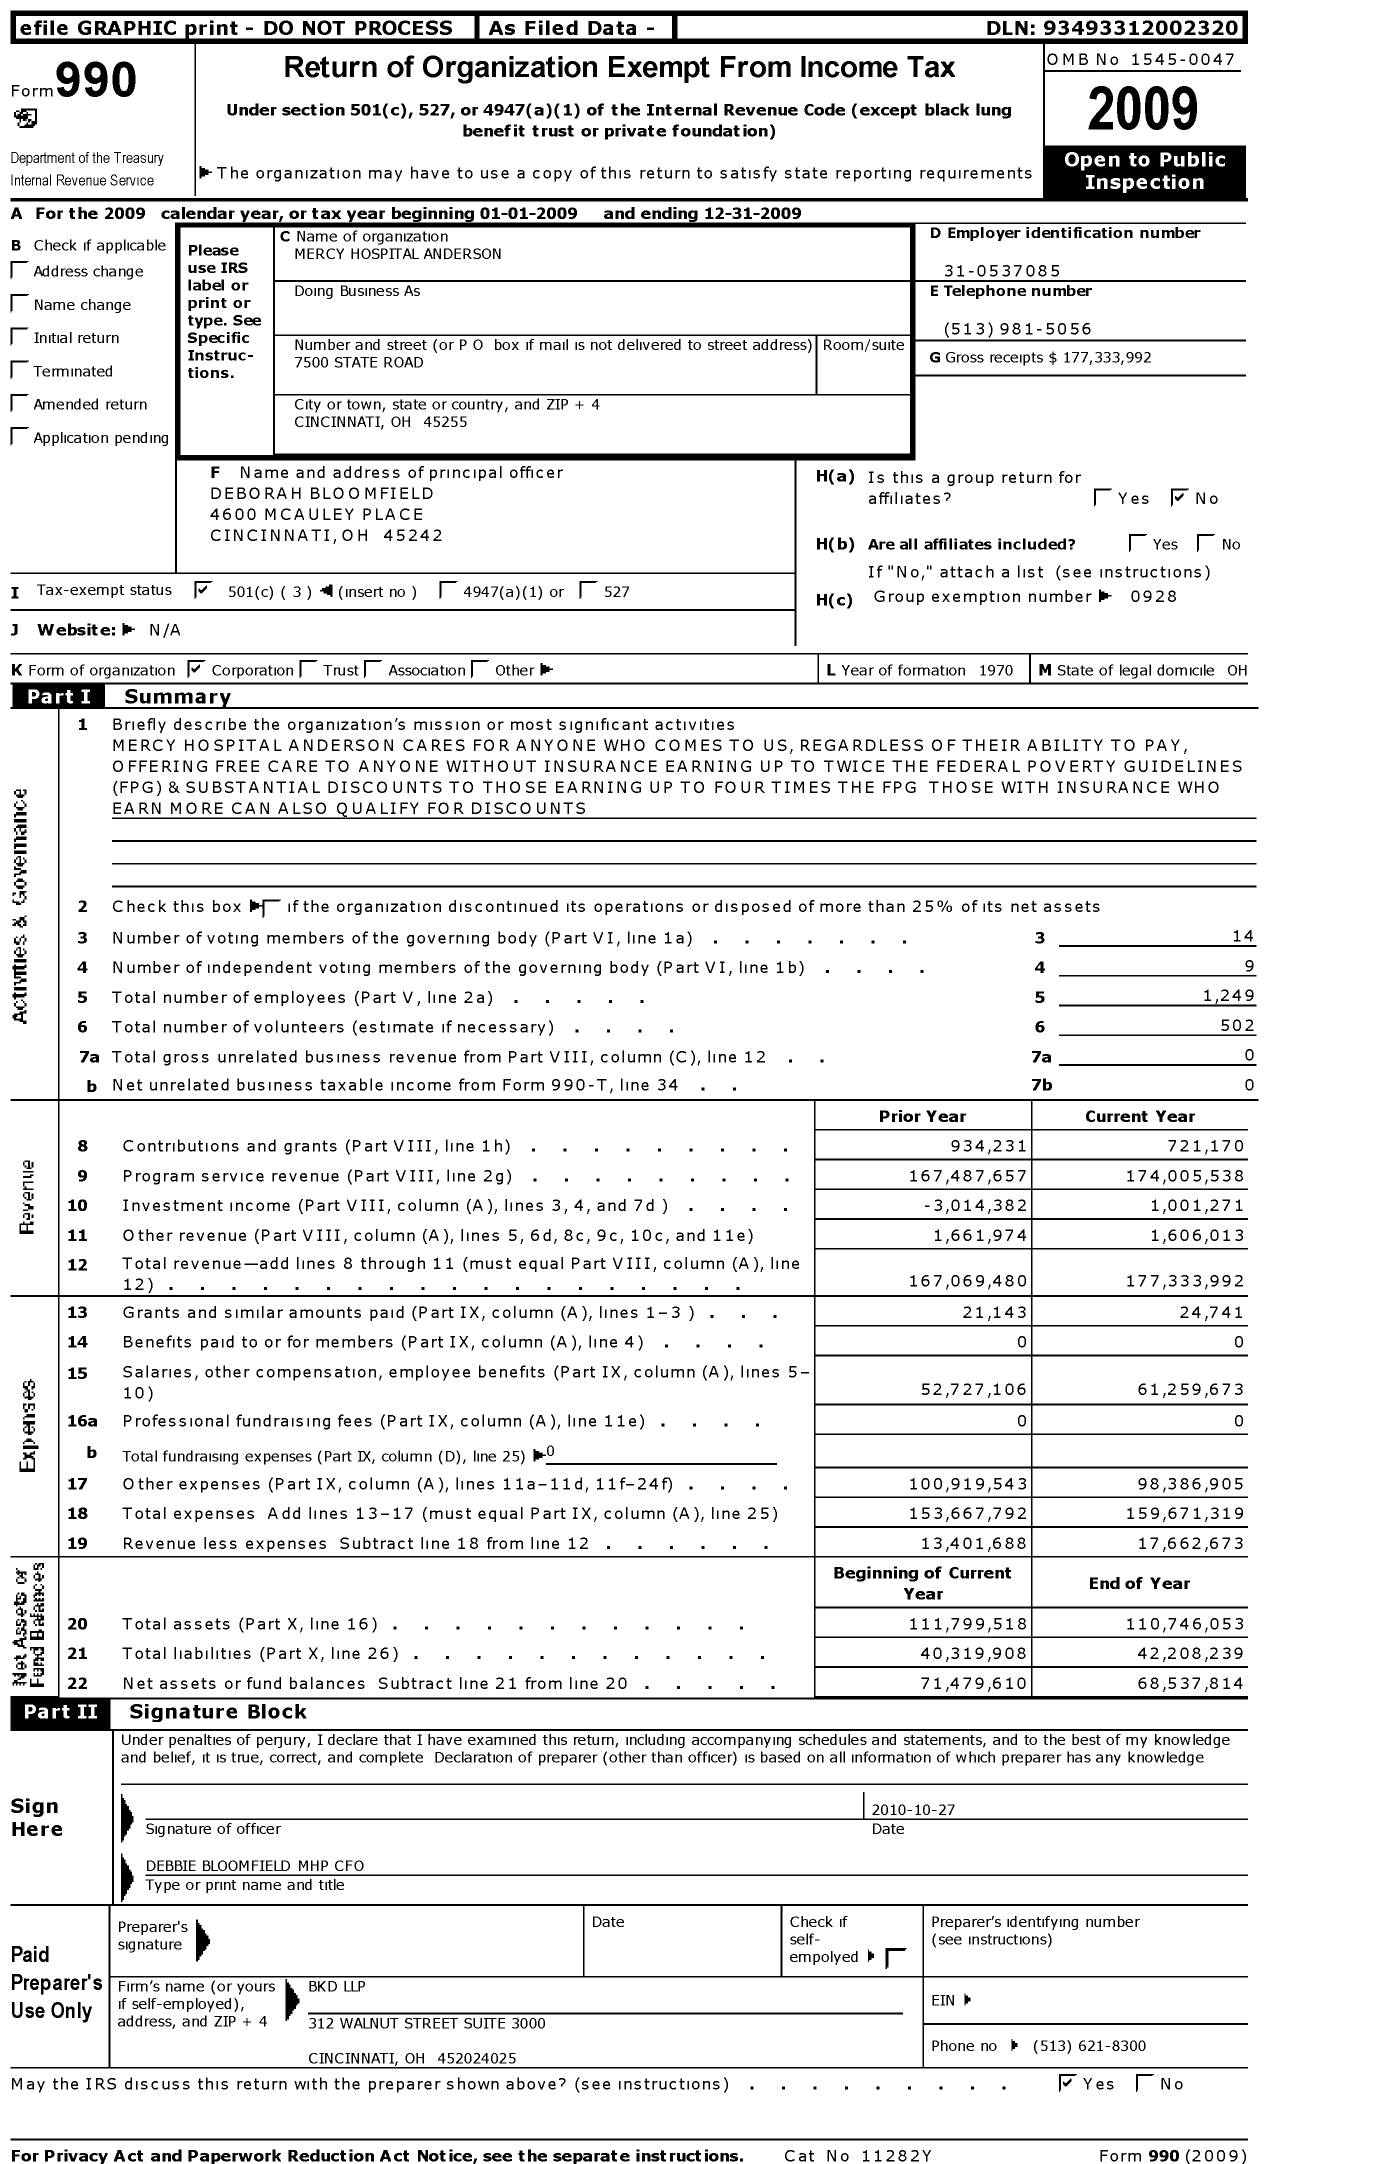 Image of first page of 2009 Form 990 for Mercy Hospital Anderson